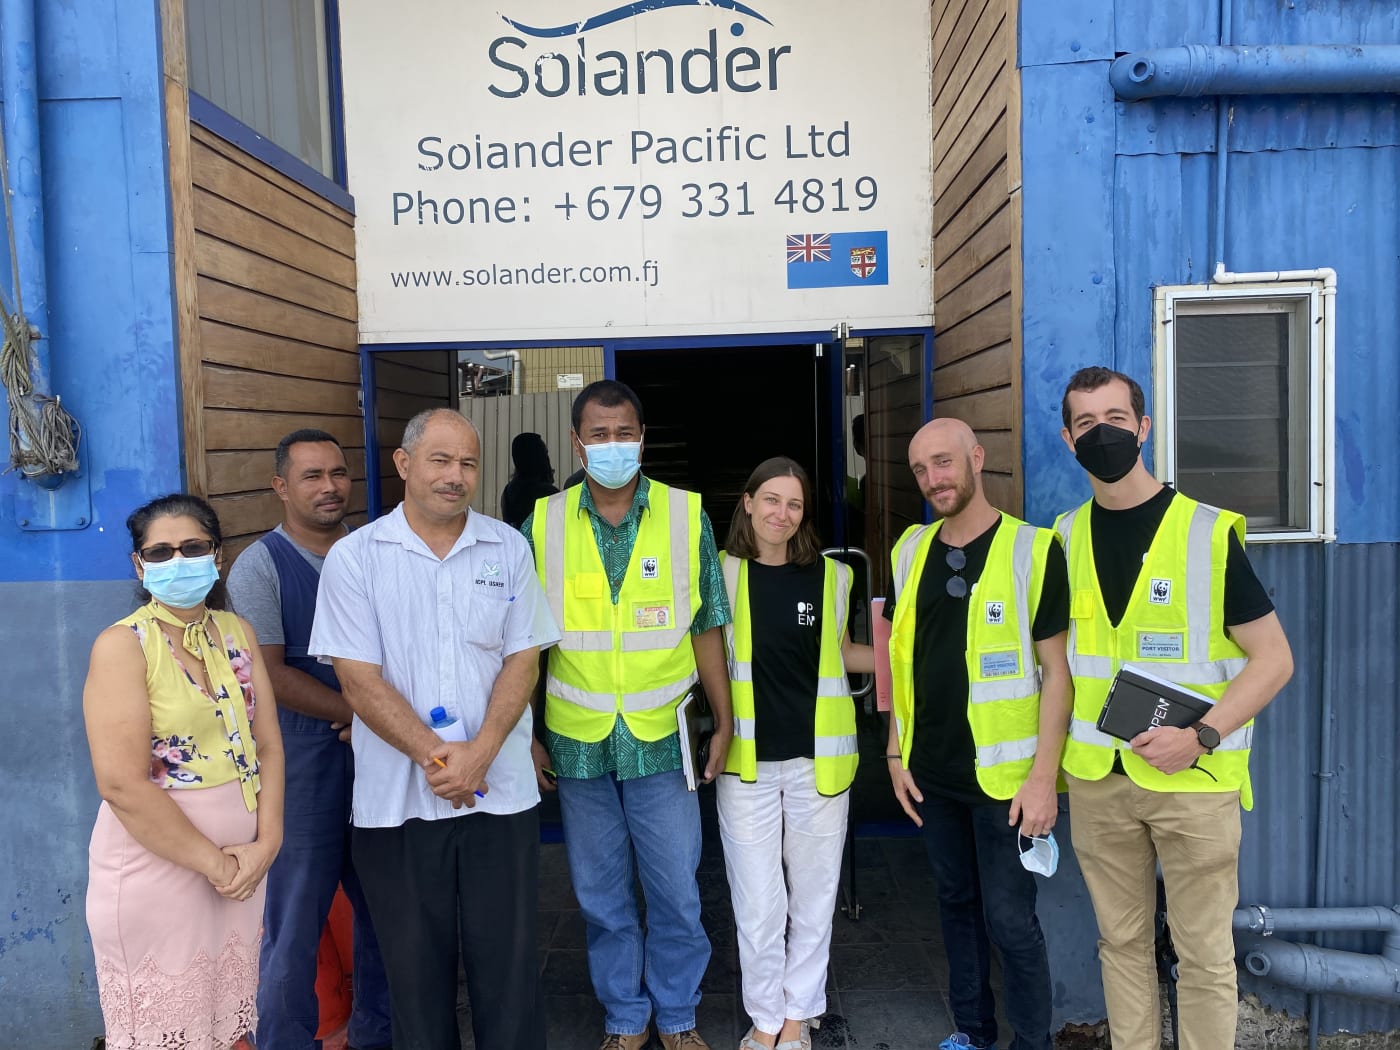 Solander Pacific, WWF Pacific and OpenSC team members outside the Solander Office at the Suva port. Left to right: Radhika Kumar (Solander), Solomone Rokotuiveikau (Solander), Joe Peters (Solander), Adriu Iene (WWF Pac), Lily Lunday (OpenSC), Pierre Wittorski (OpenSC), Tim Baker (OpenSC).